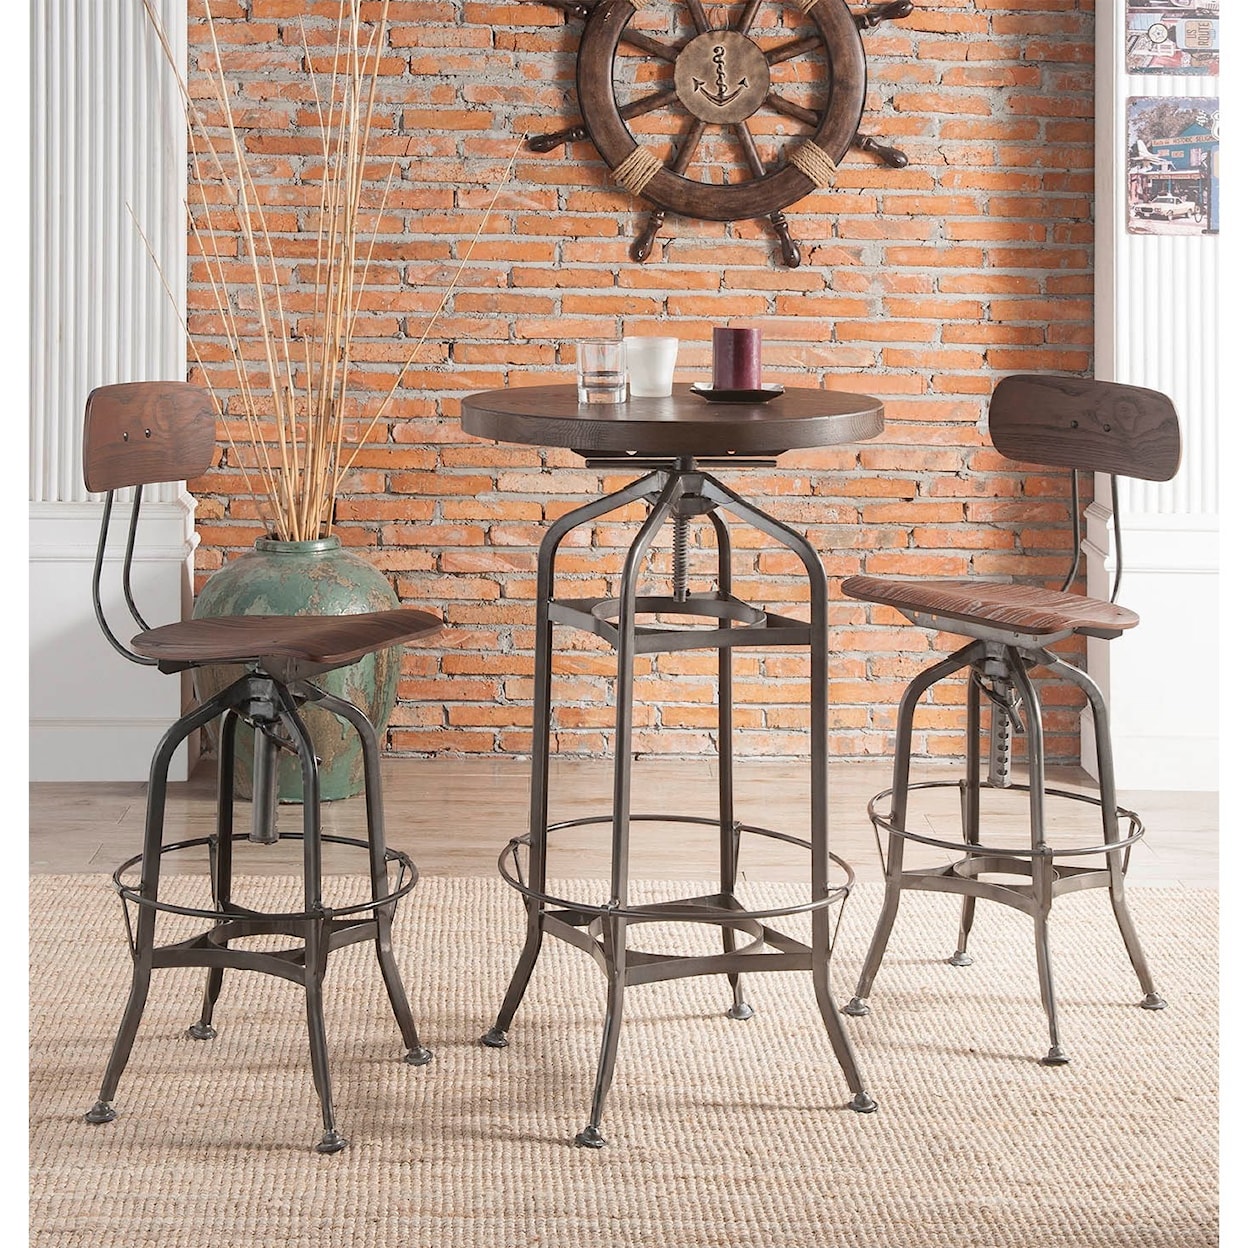 Acme Furniture Kaeso Pub Table Dining Set with 2 Chairs